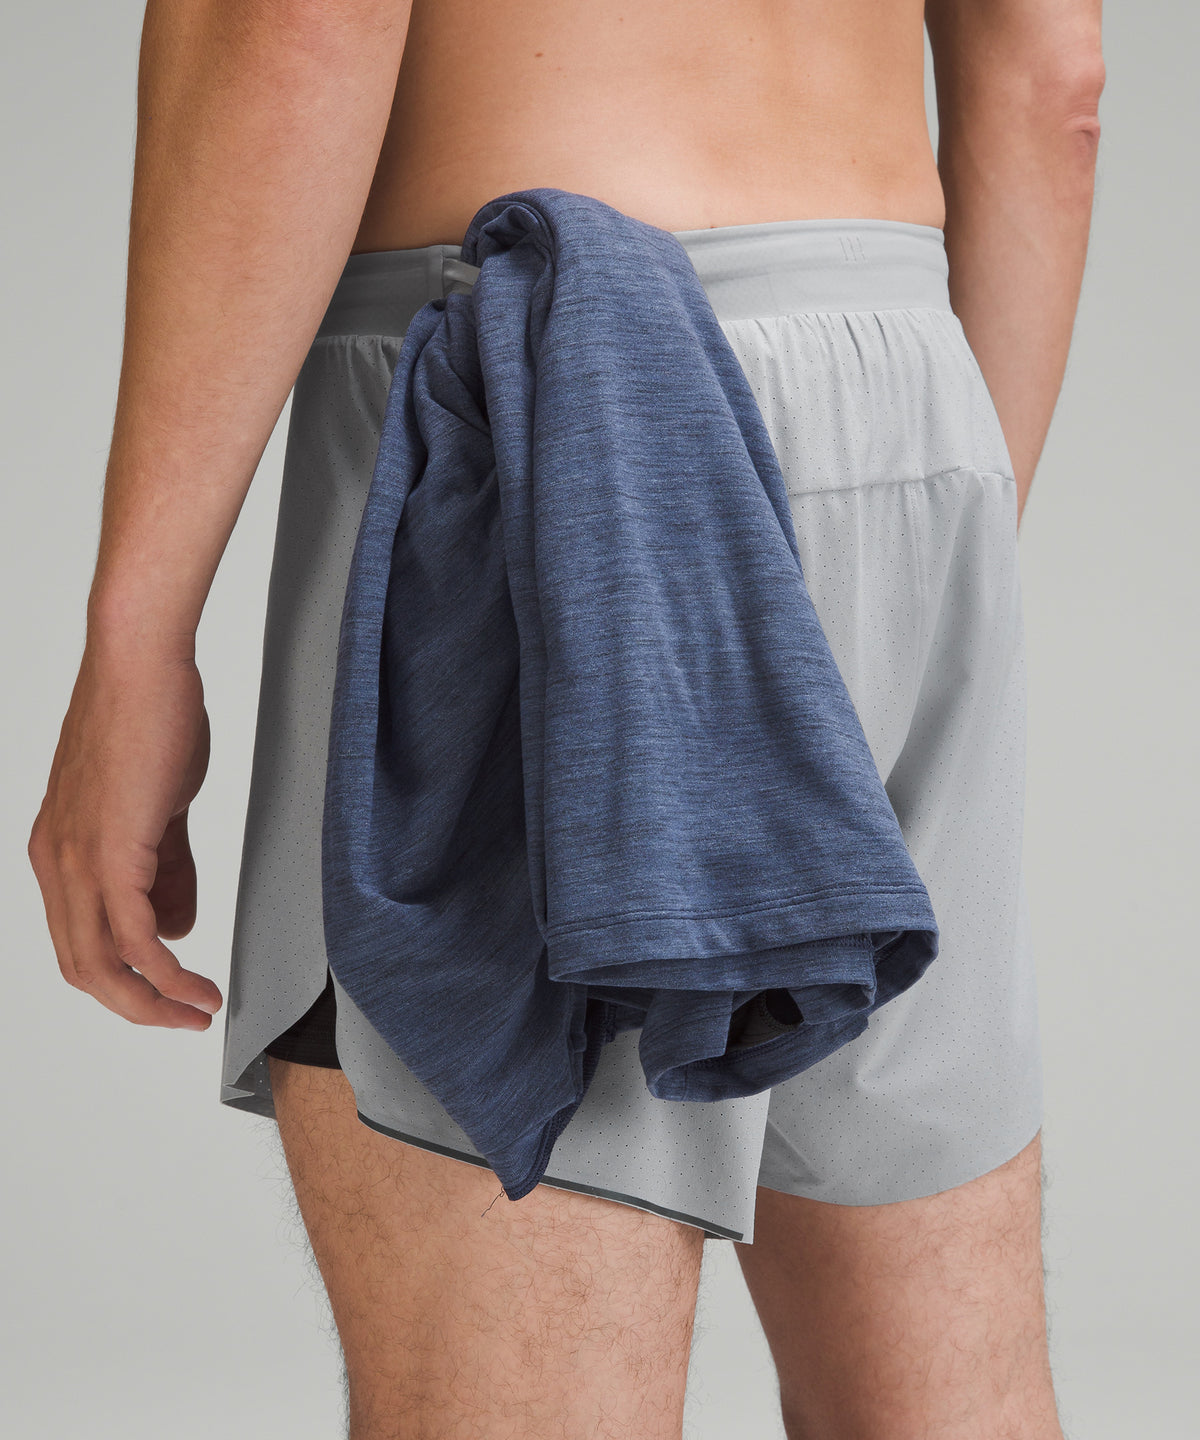 Lululemon Fast and Free Short 6 - Lined – The Shop at Equinox